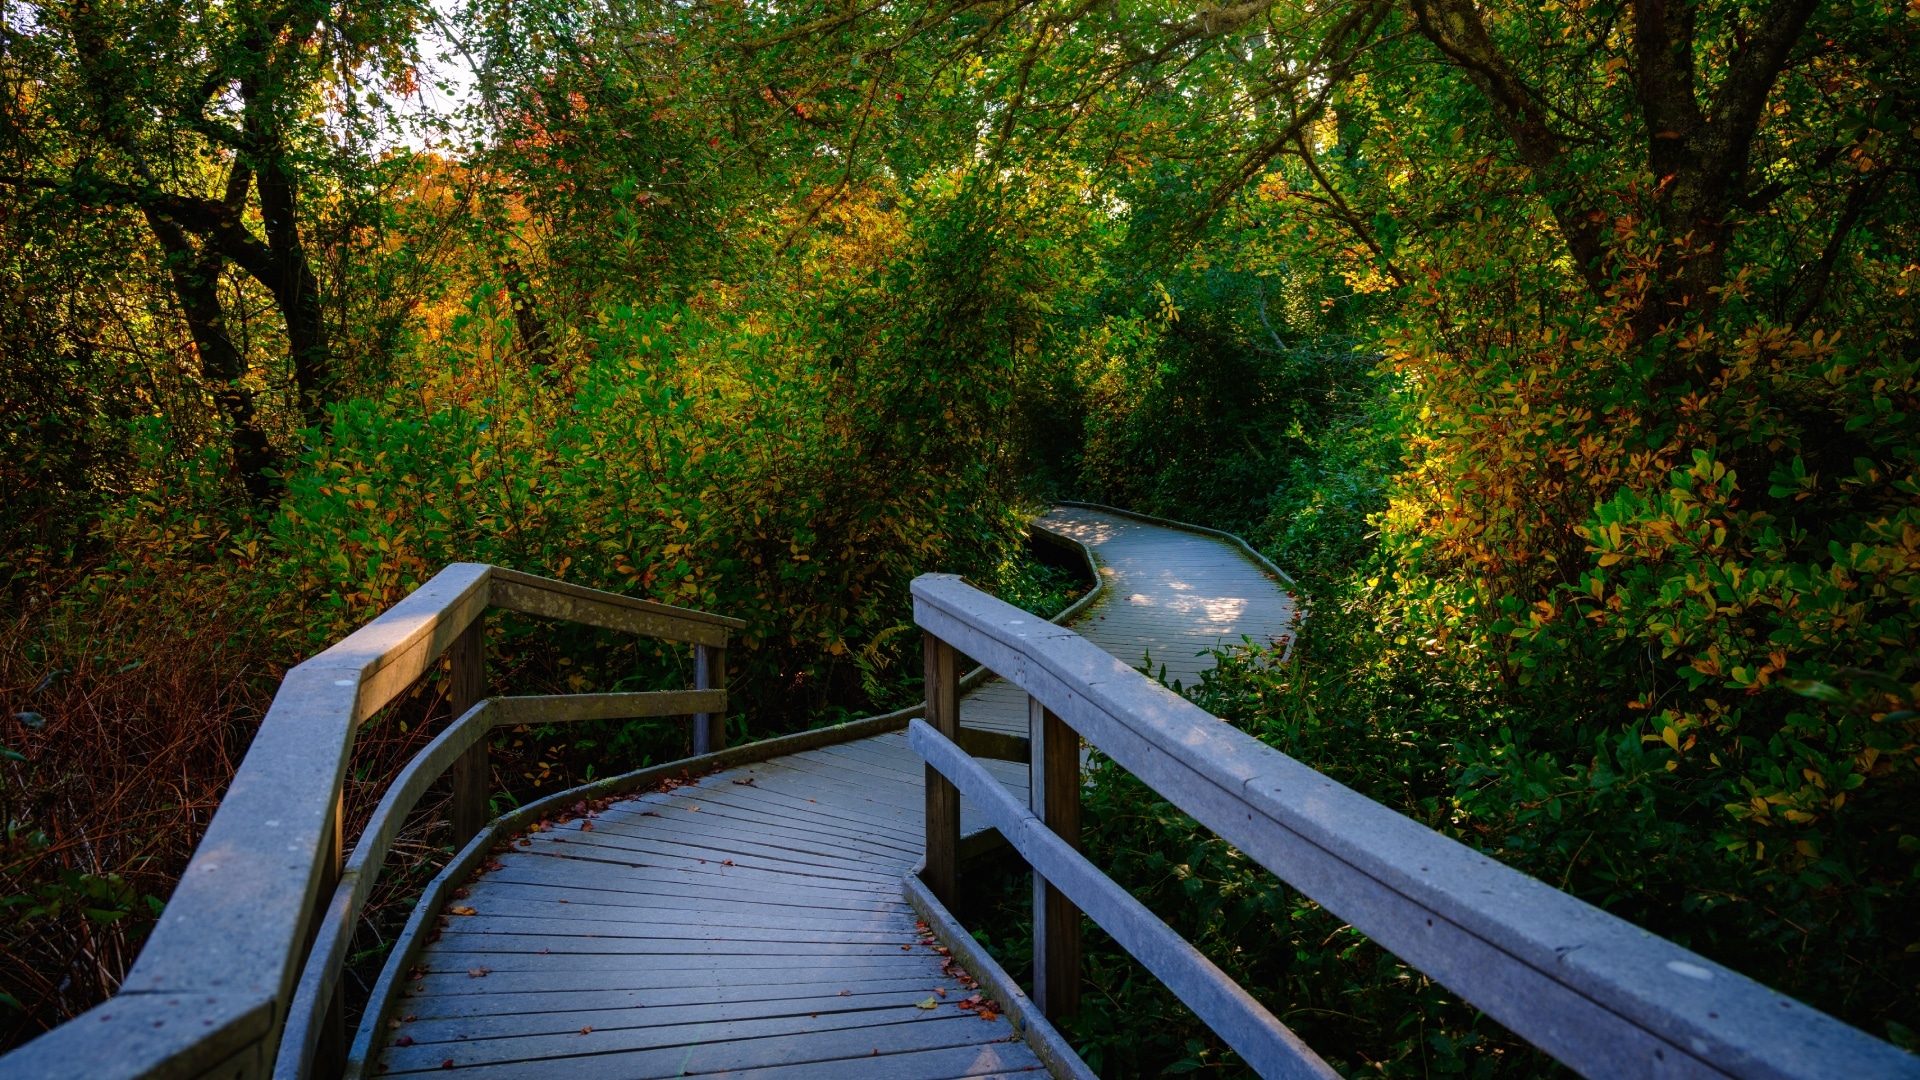 Board walk in a wooded area during fall a